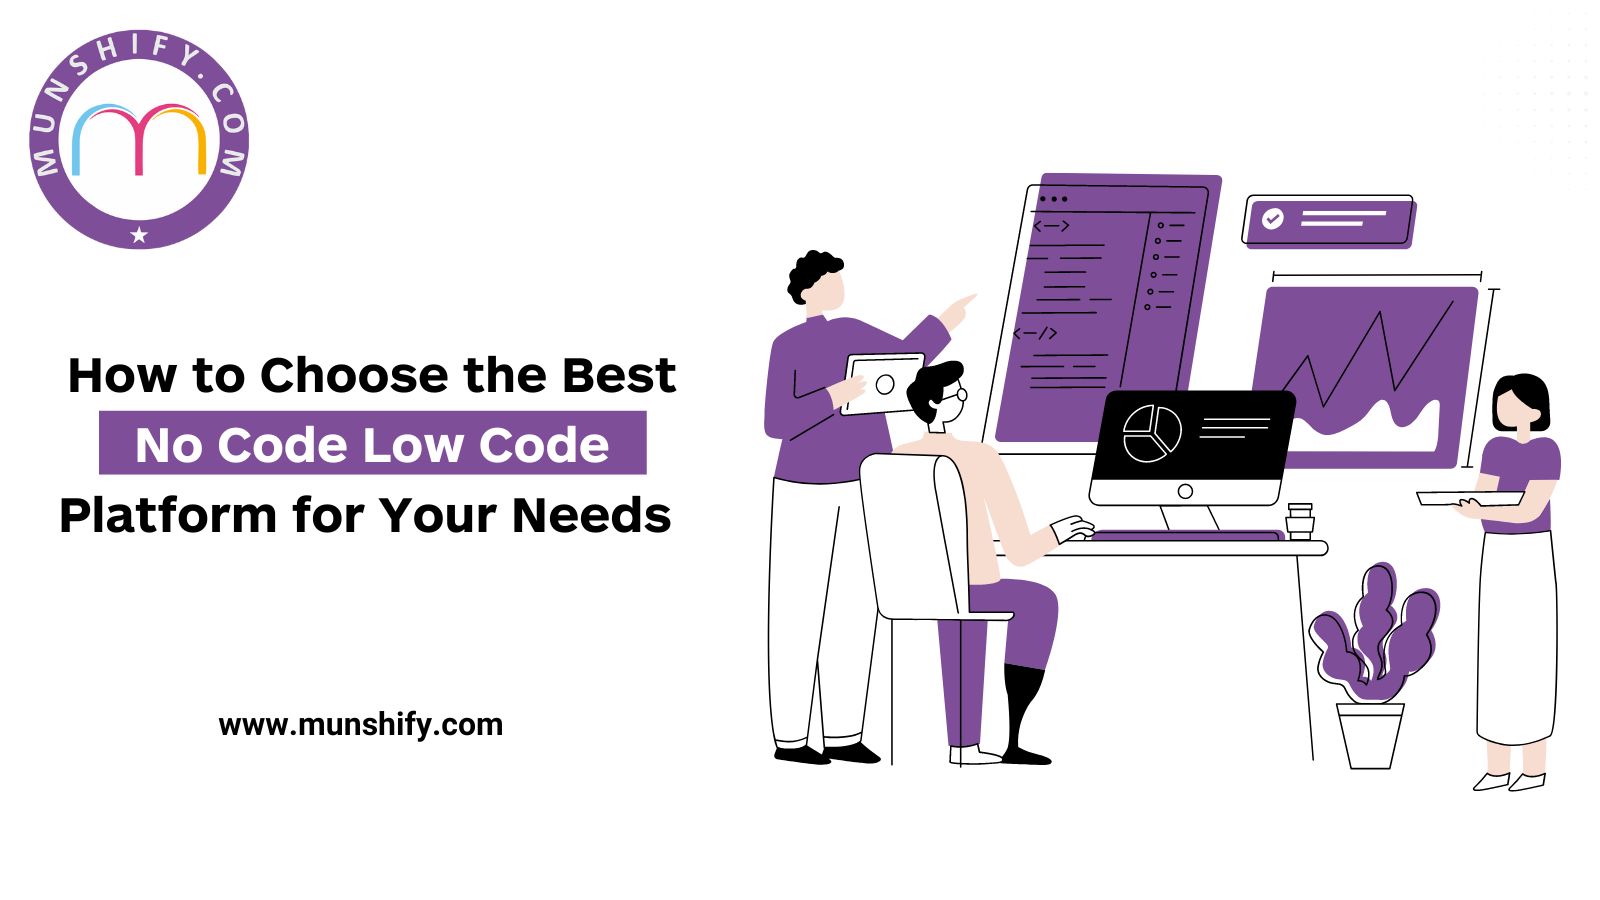 How to Choose the Best No Code Low Code Platform for Your Needs 